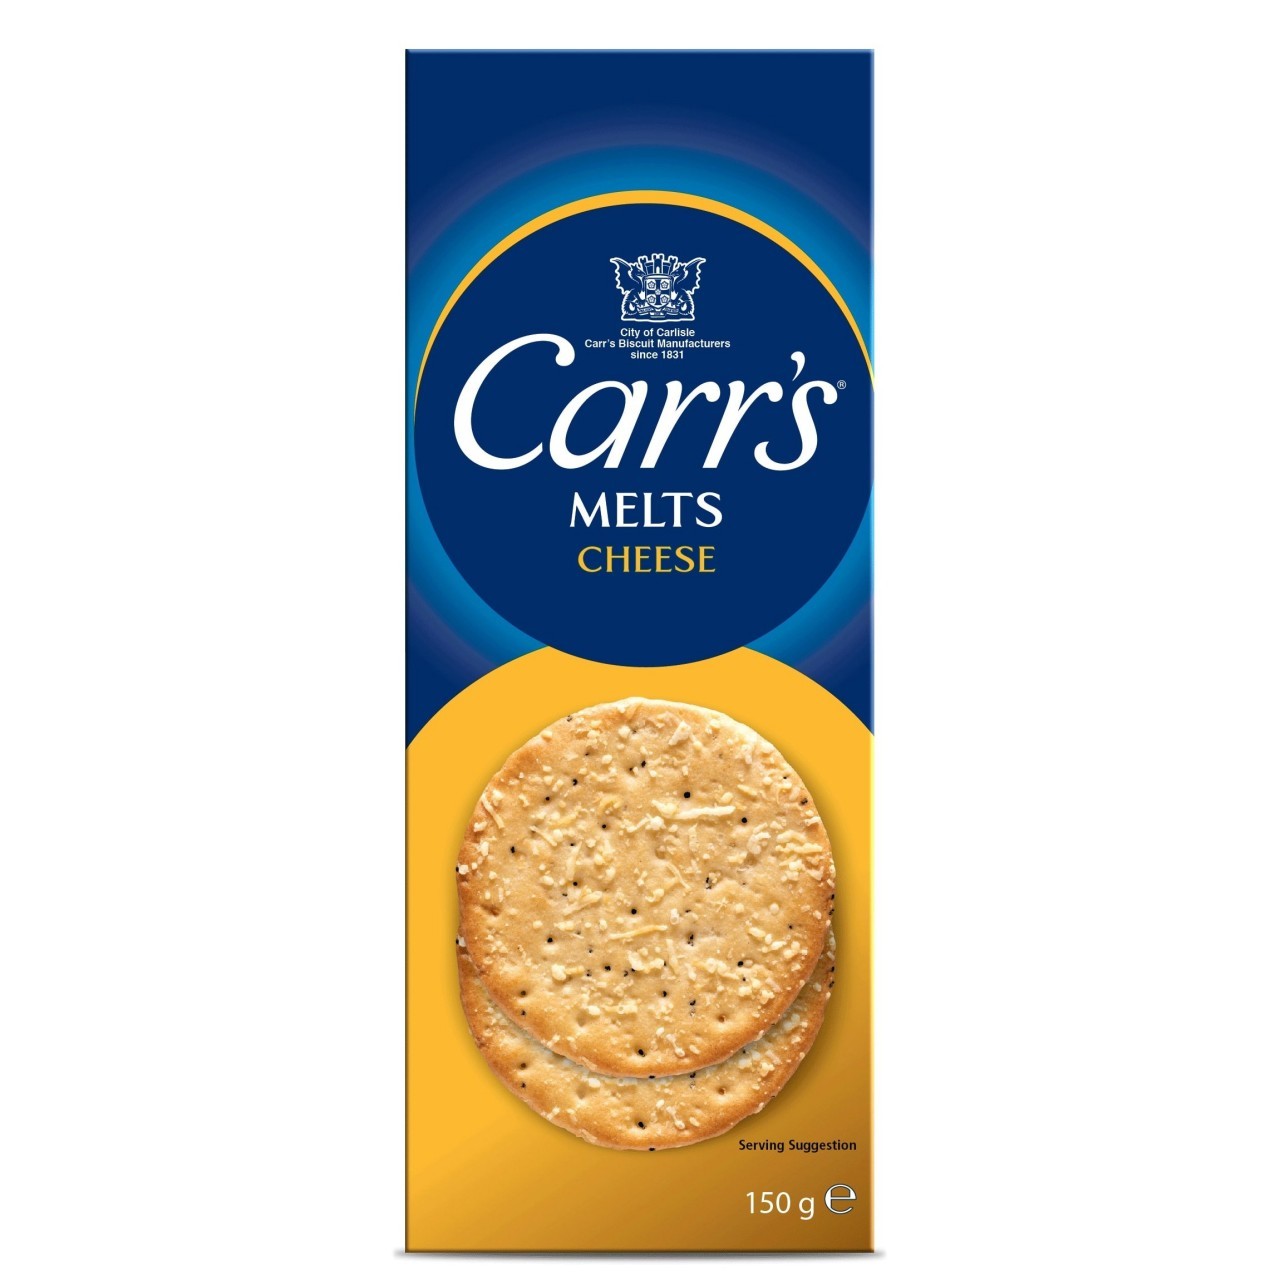 CARRS CHEESE MELTS 150g